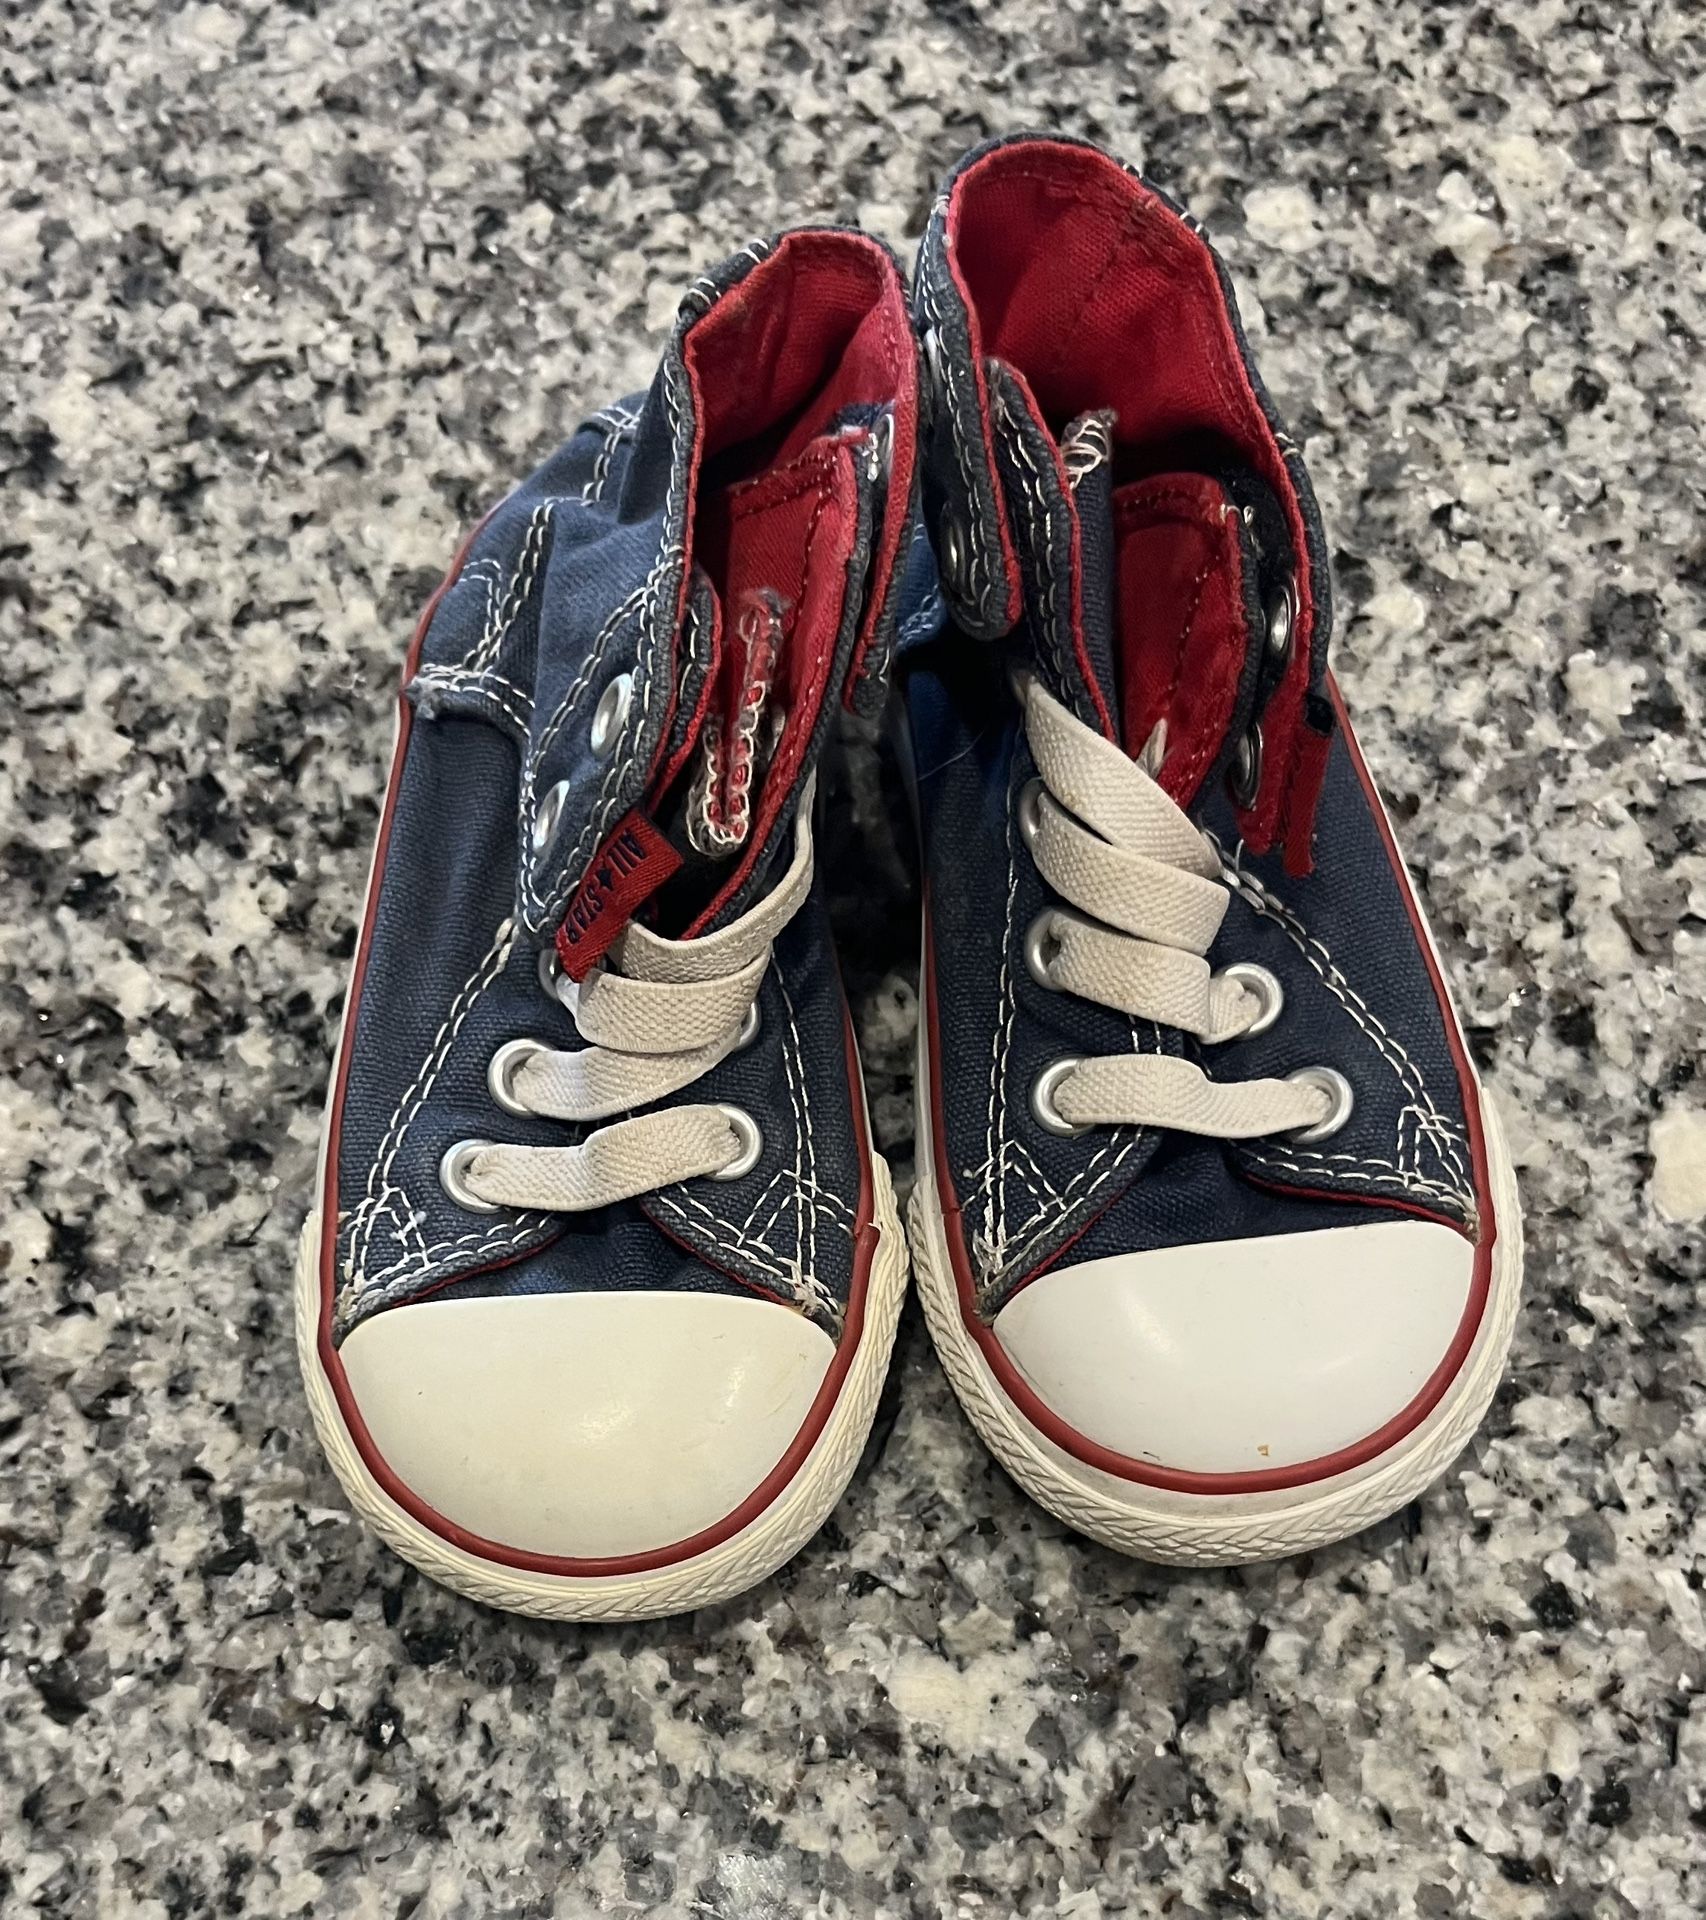 Used Toddler Size 6 Converse Shoes